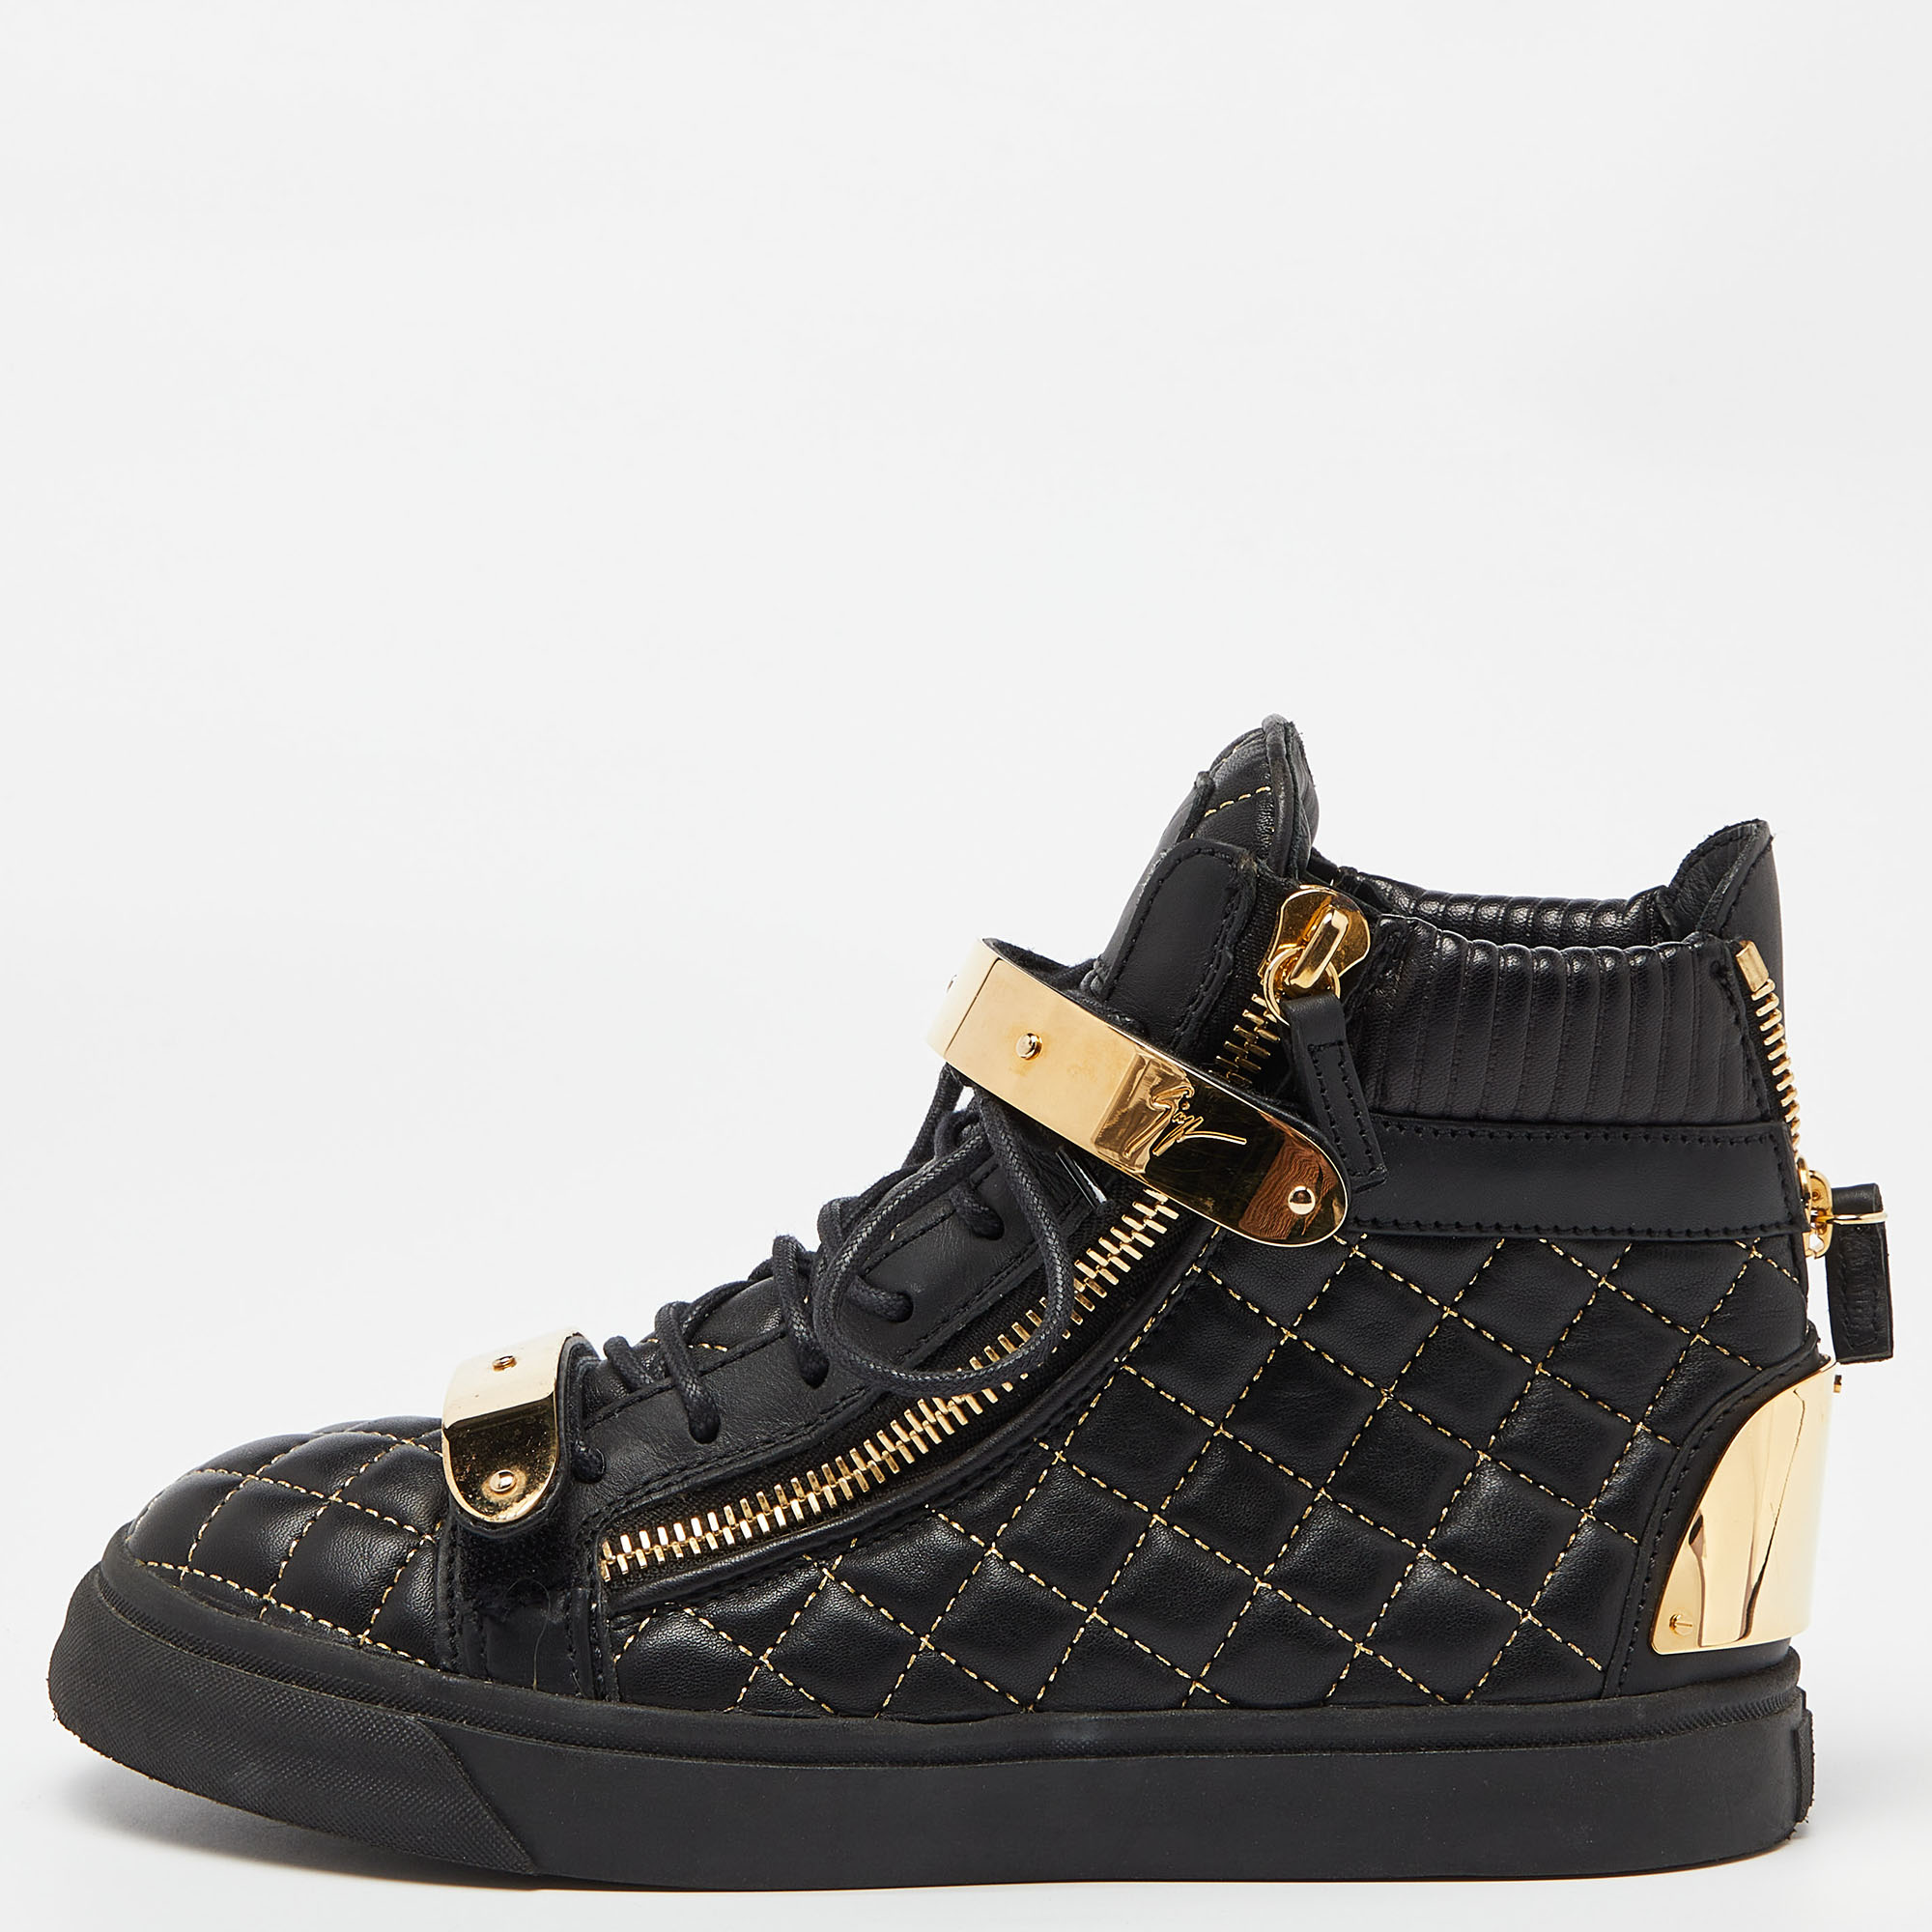 Giuseppe zanotti black quilted leather coby high top sneakers size 38.5